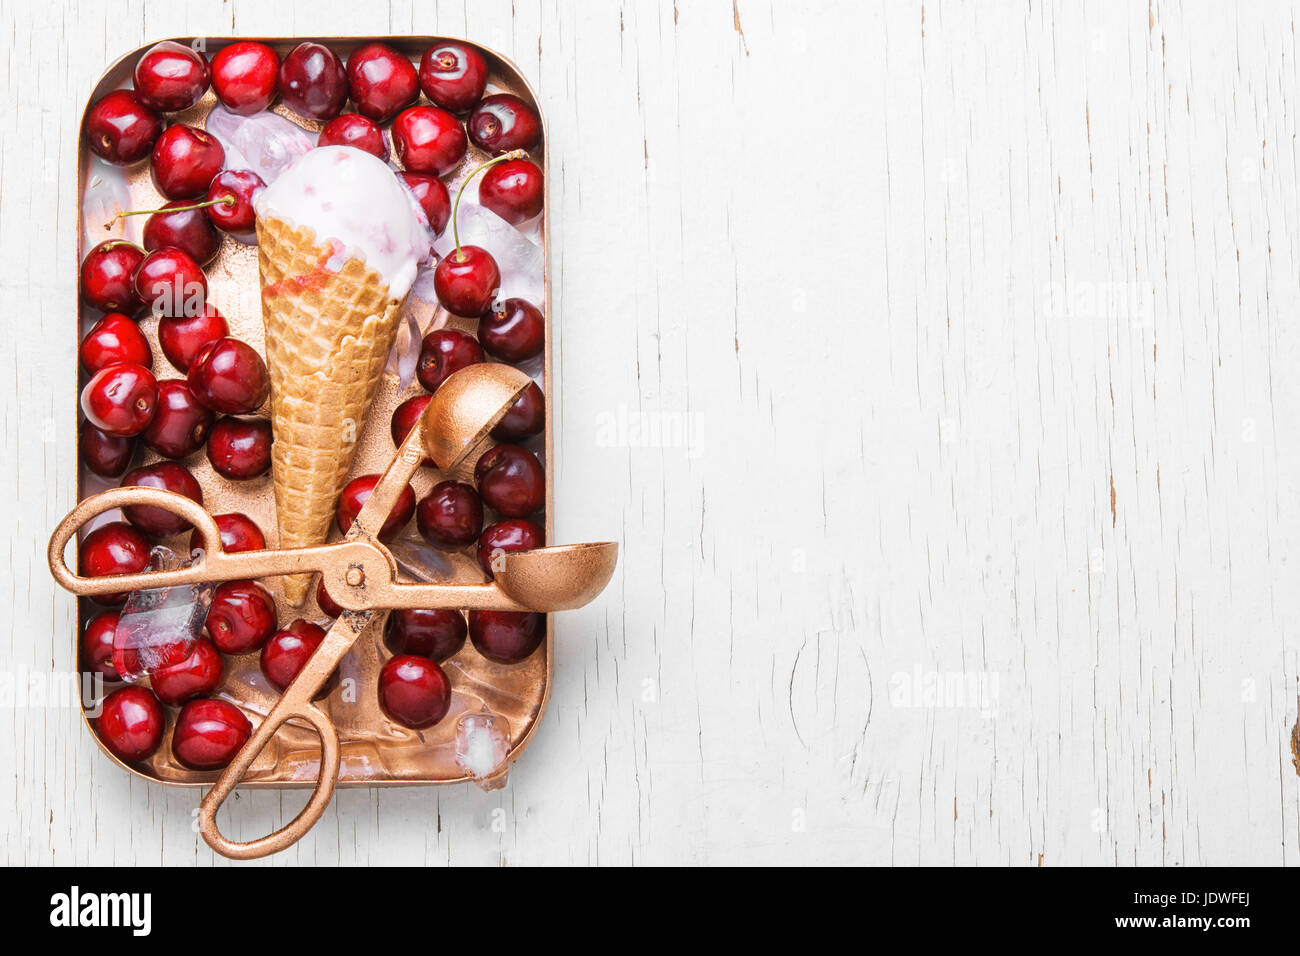 ice cream in waffle cones and cherry on white background Stock Photo